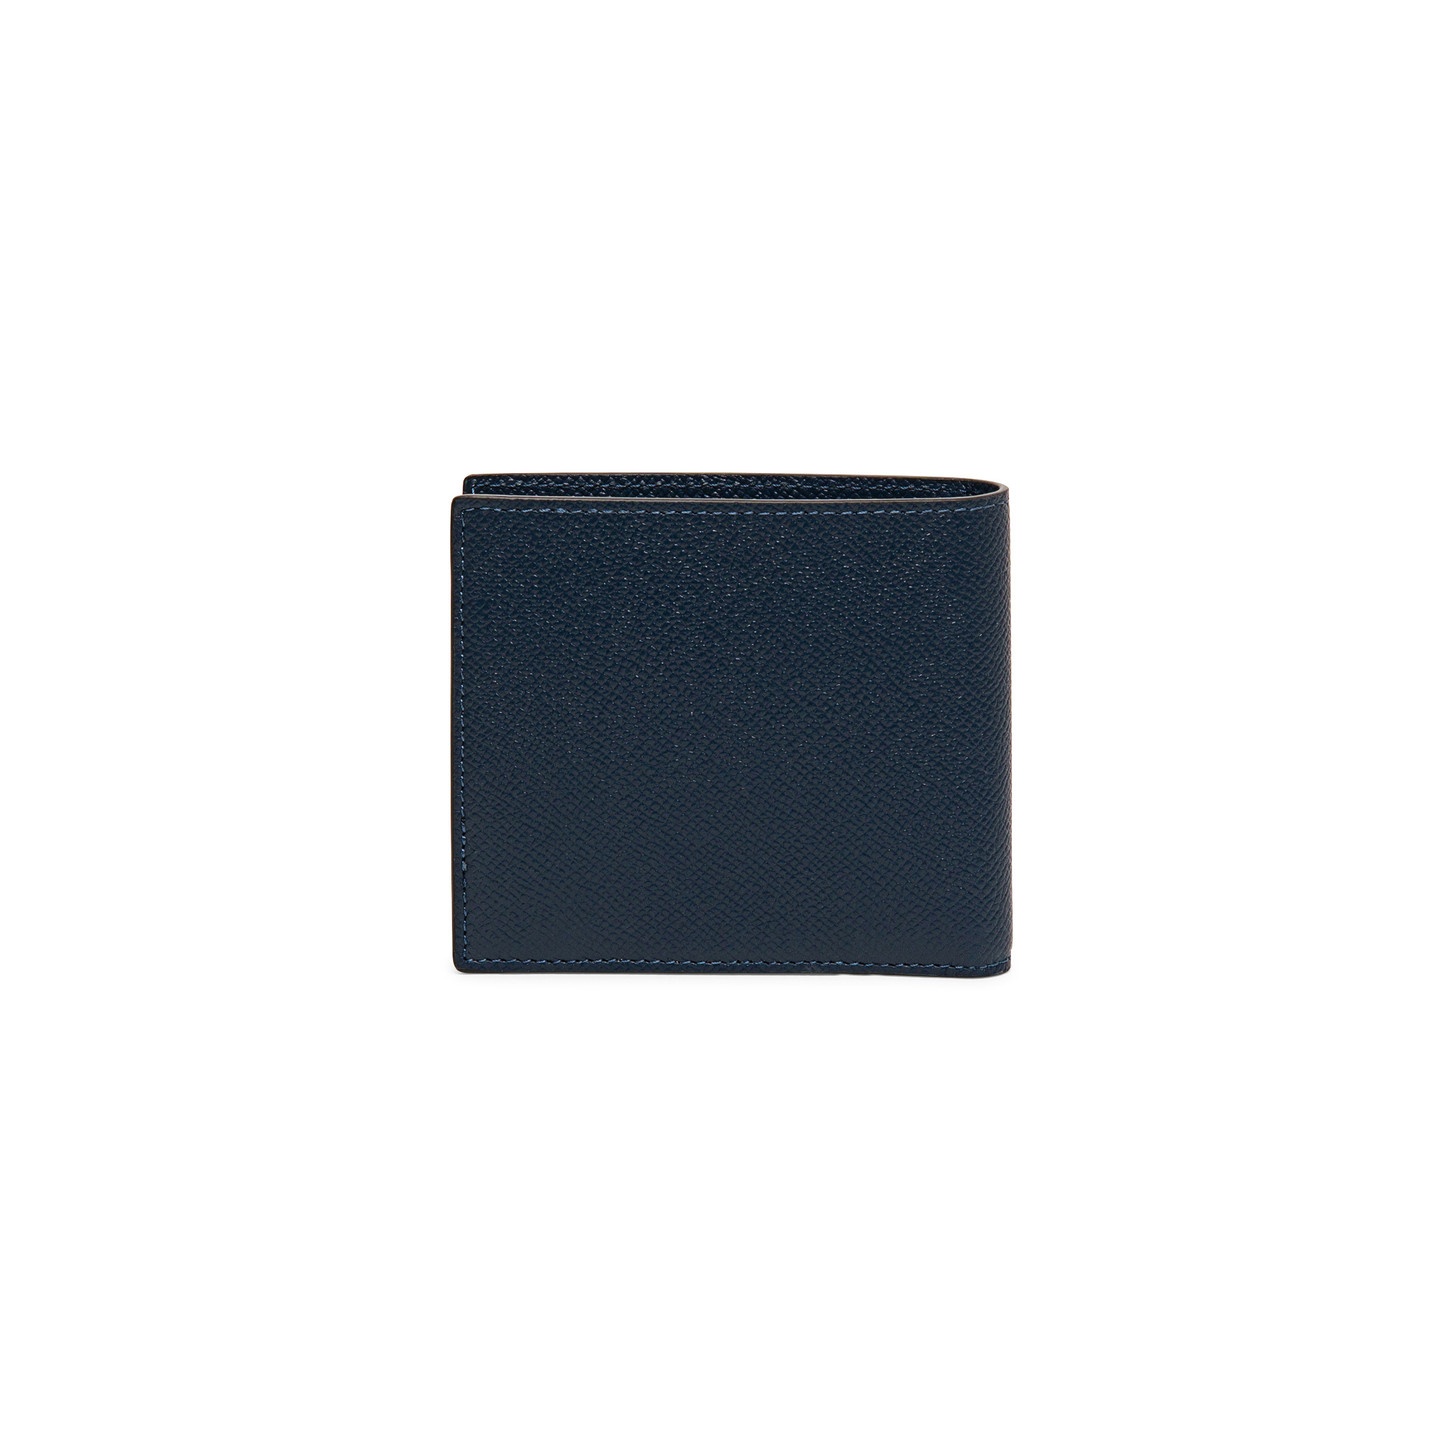 Blue saffiano leather wallet with coin pocket - 2